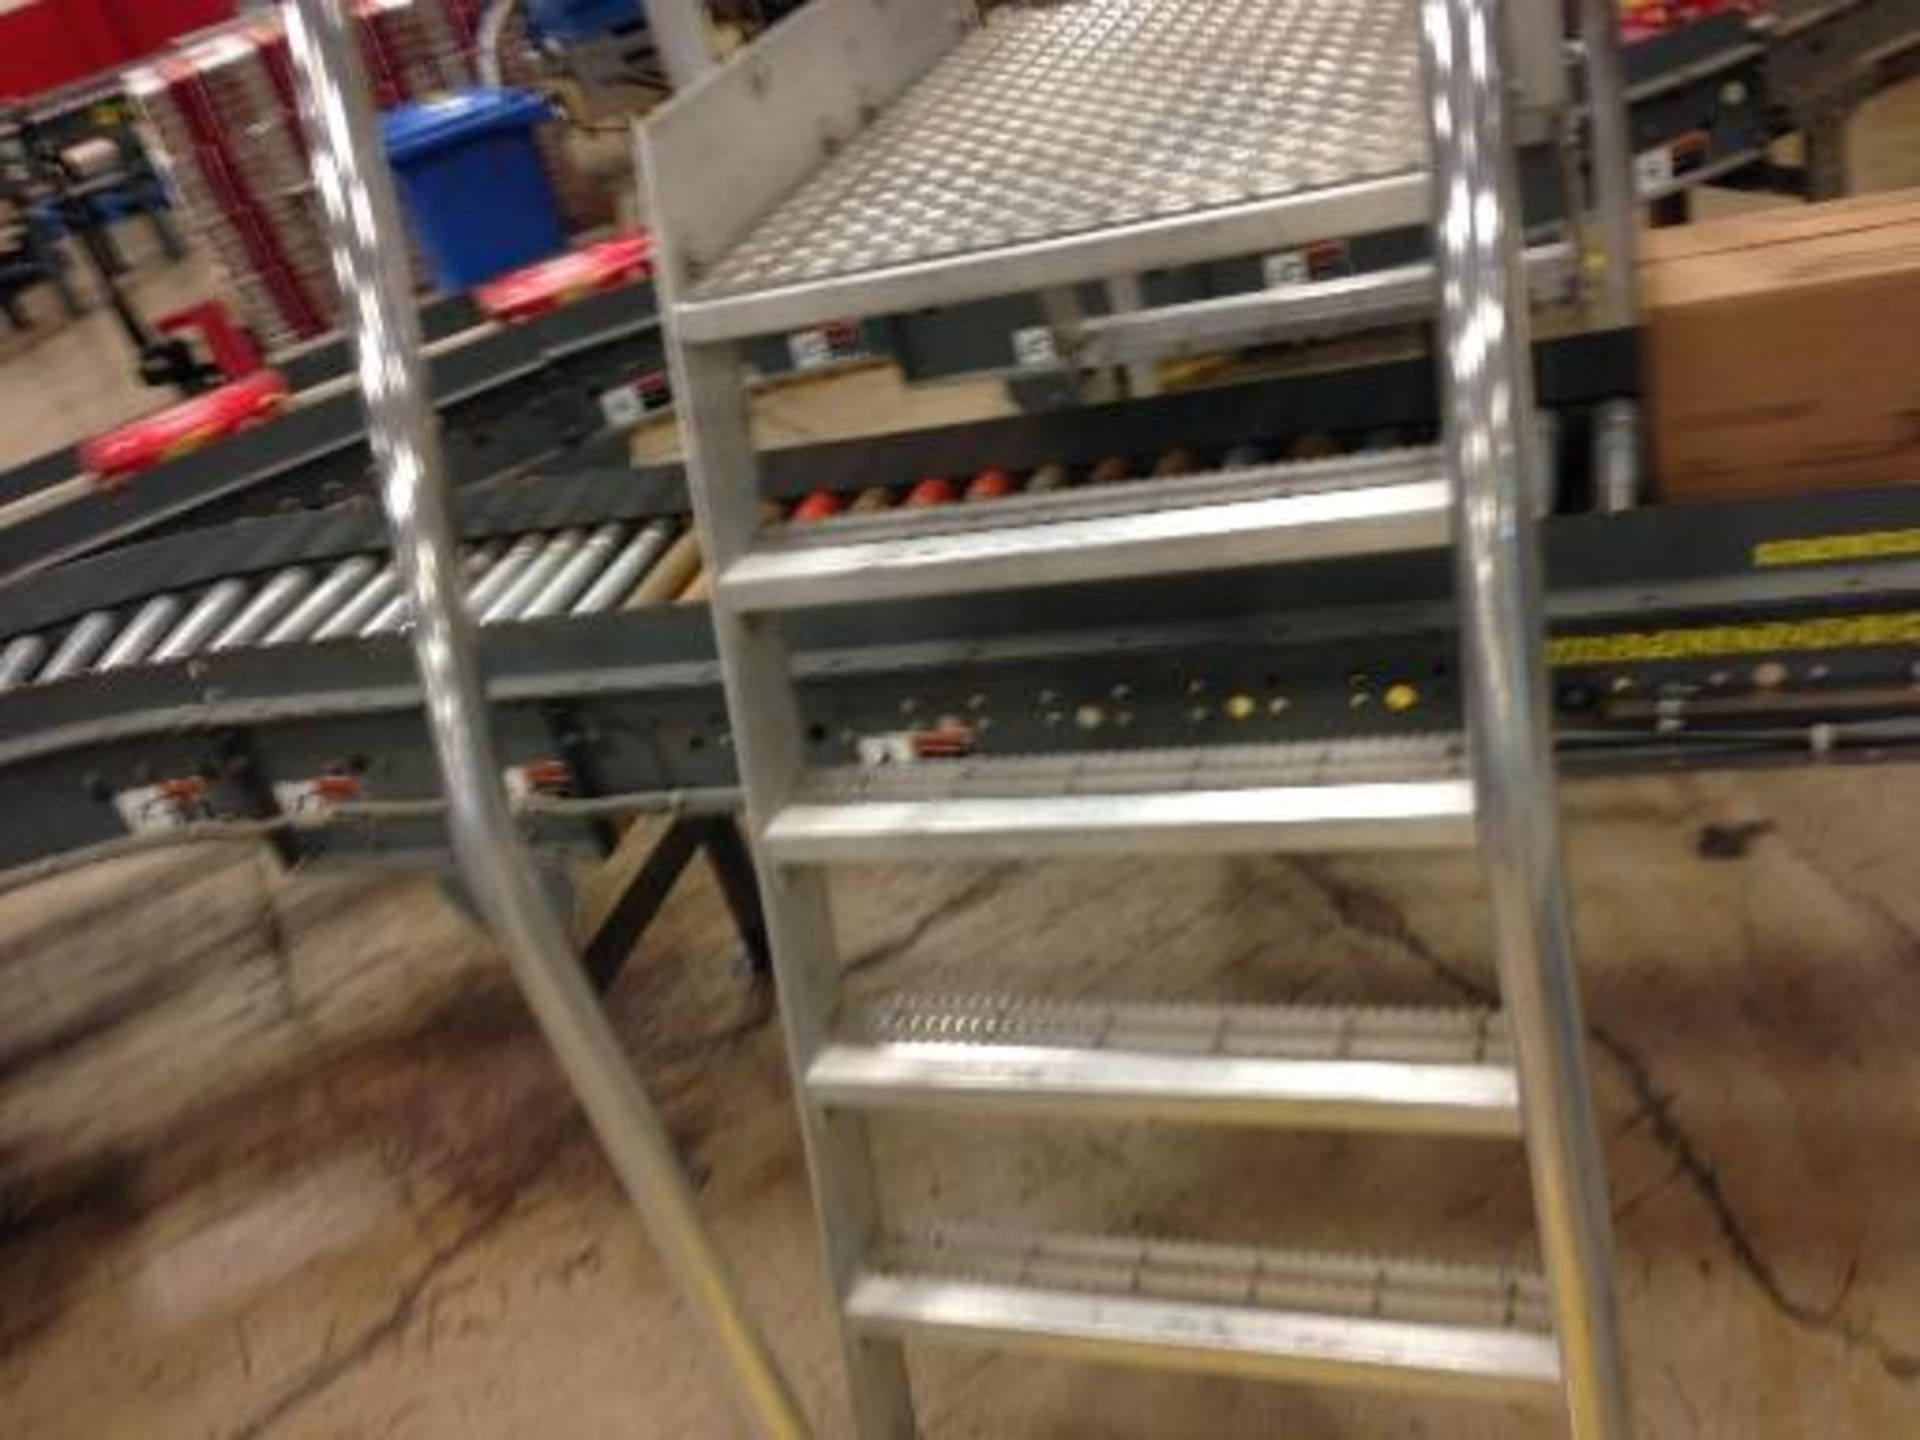 Full case conveyor 40 feet long to palletized (line 13) right to left stand alone line. Located in